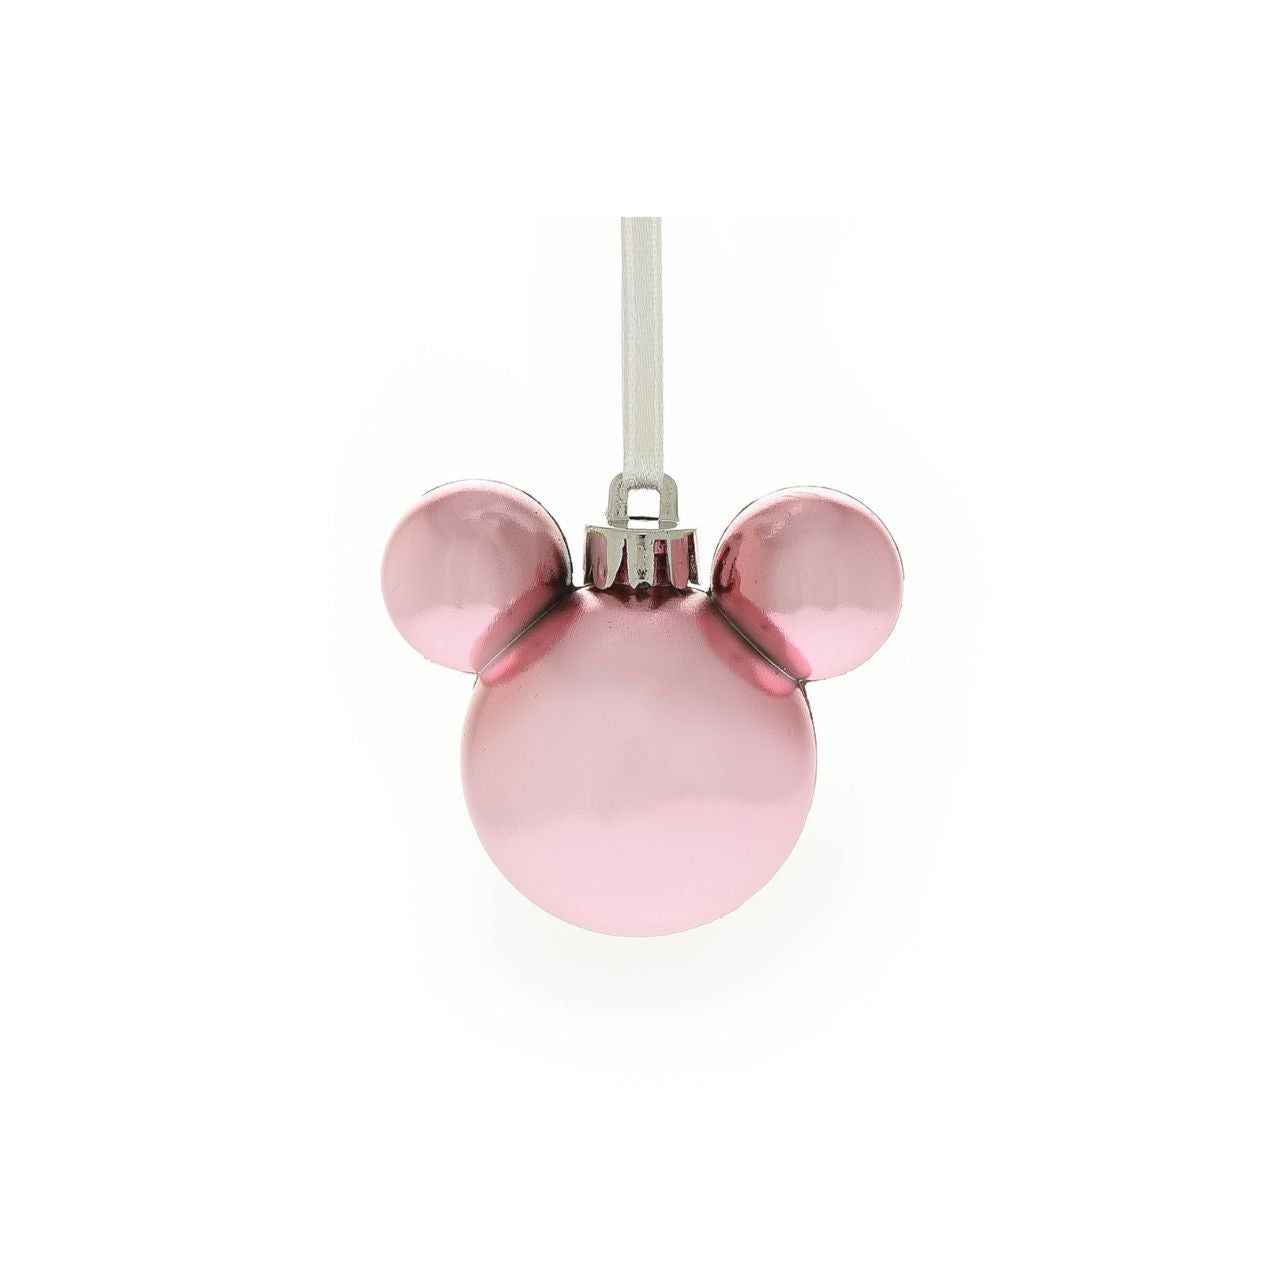 Disney Set of 12 Mini Mickey Baubles Assorted Finishes  This assortment of 12 Mickey baubles would look magical on any Christmas tree this festive season. The cute, iconic, and recognisable Mickey ear shape is certain to bring warmth and smiles to a family Christmas this year.